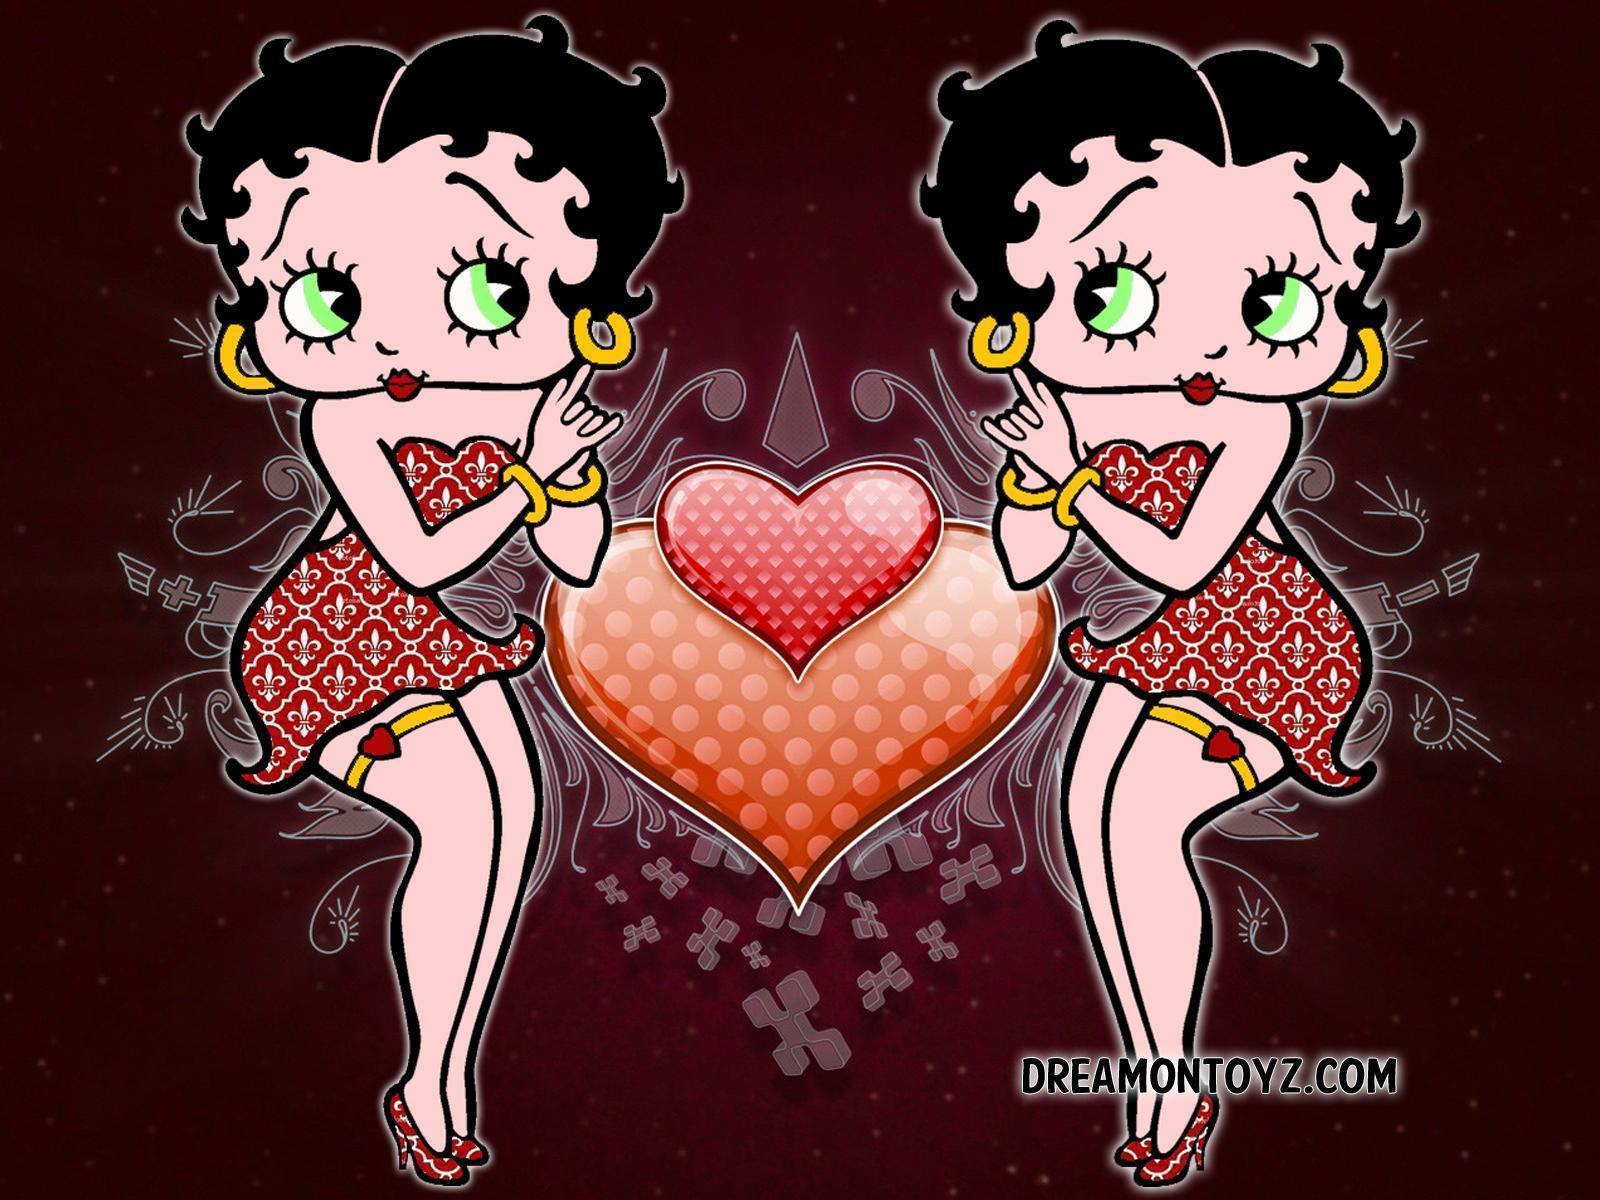 Betty Boop Picture Archive: Betty Boop background and wallpaper